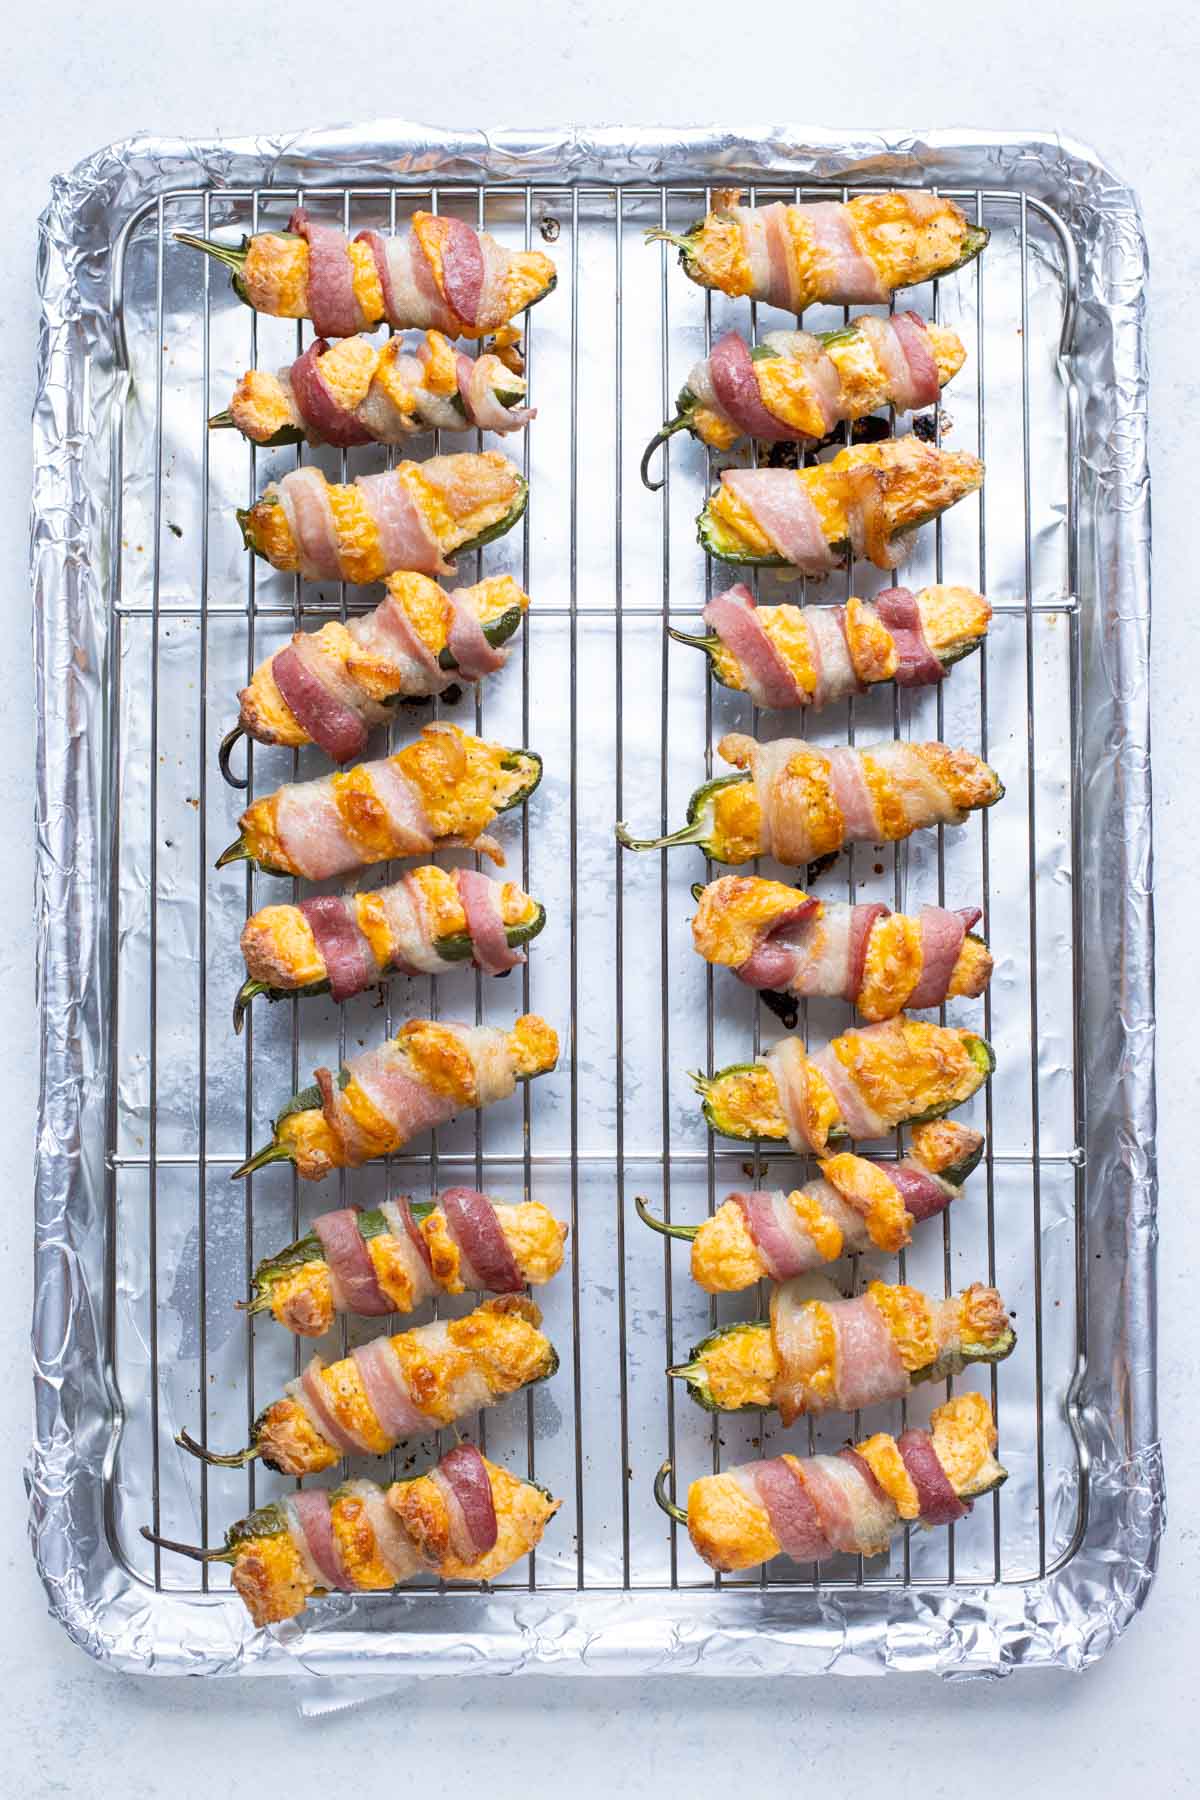 Bacon wrapped jalapeno poppers are cooked in the oven until golden brown.